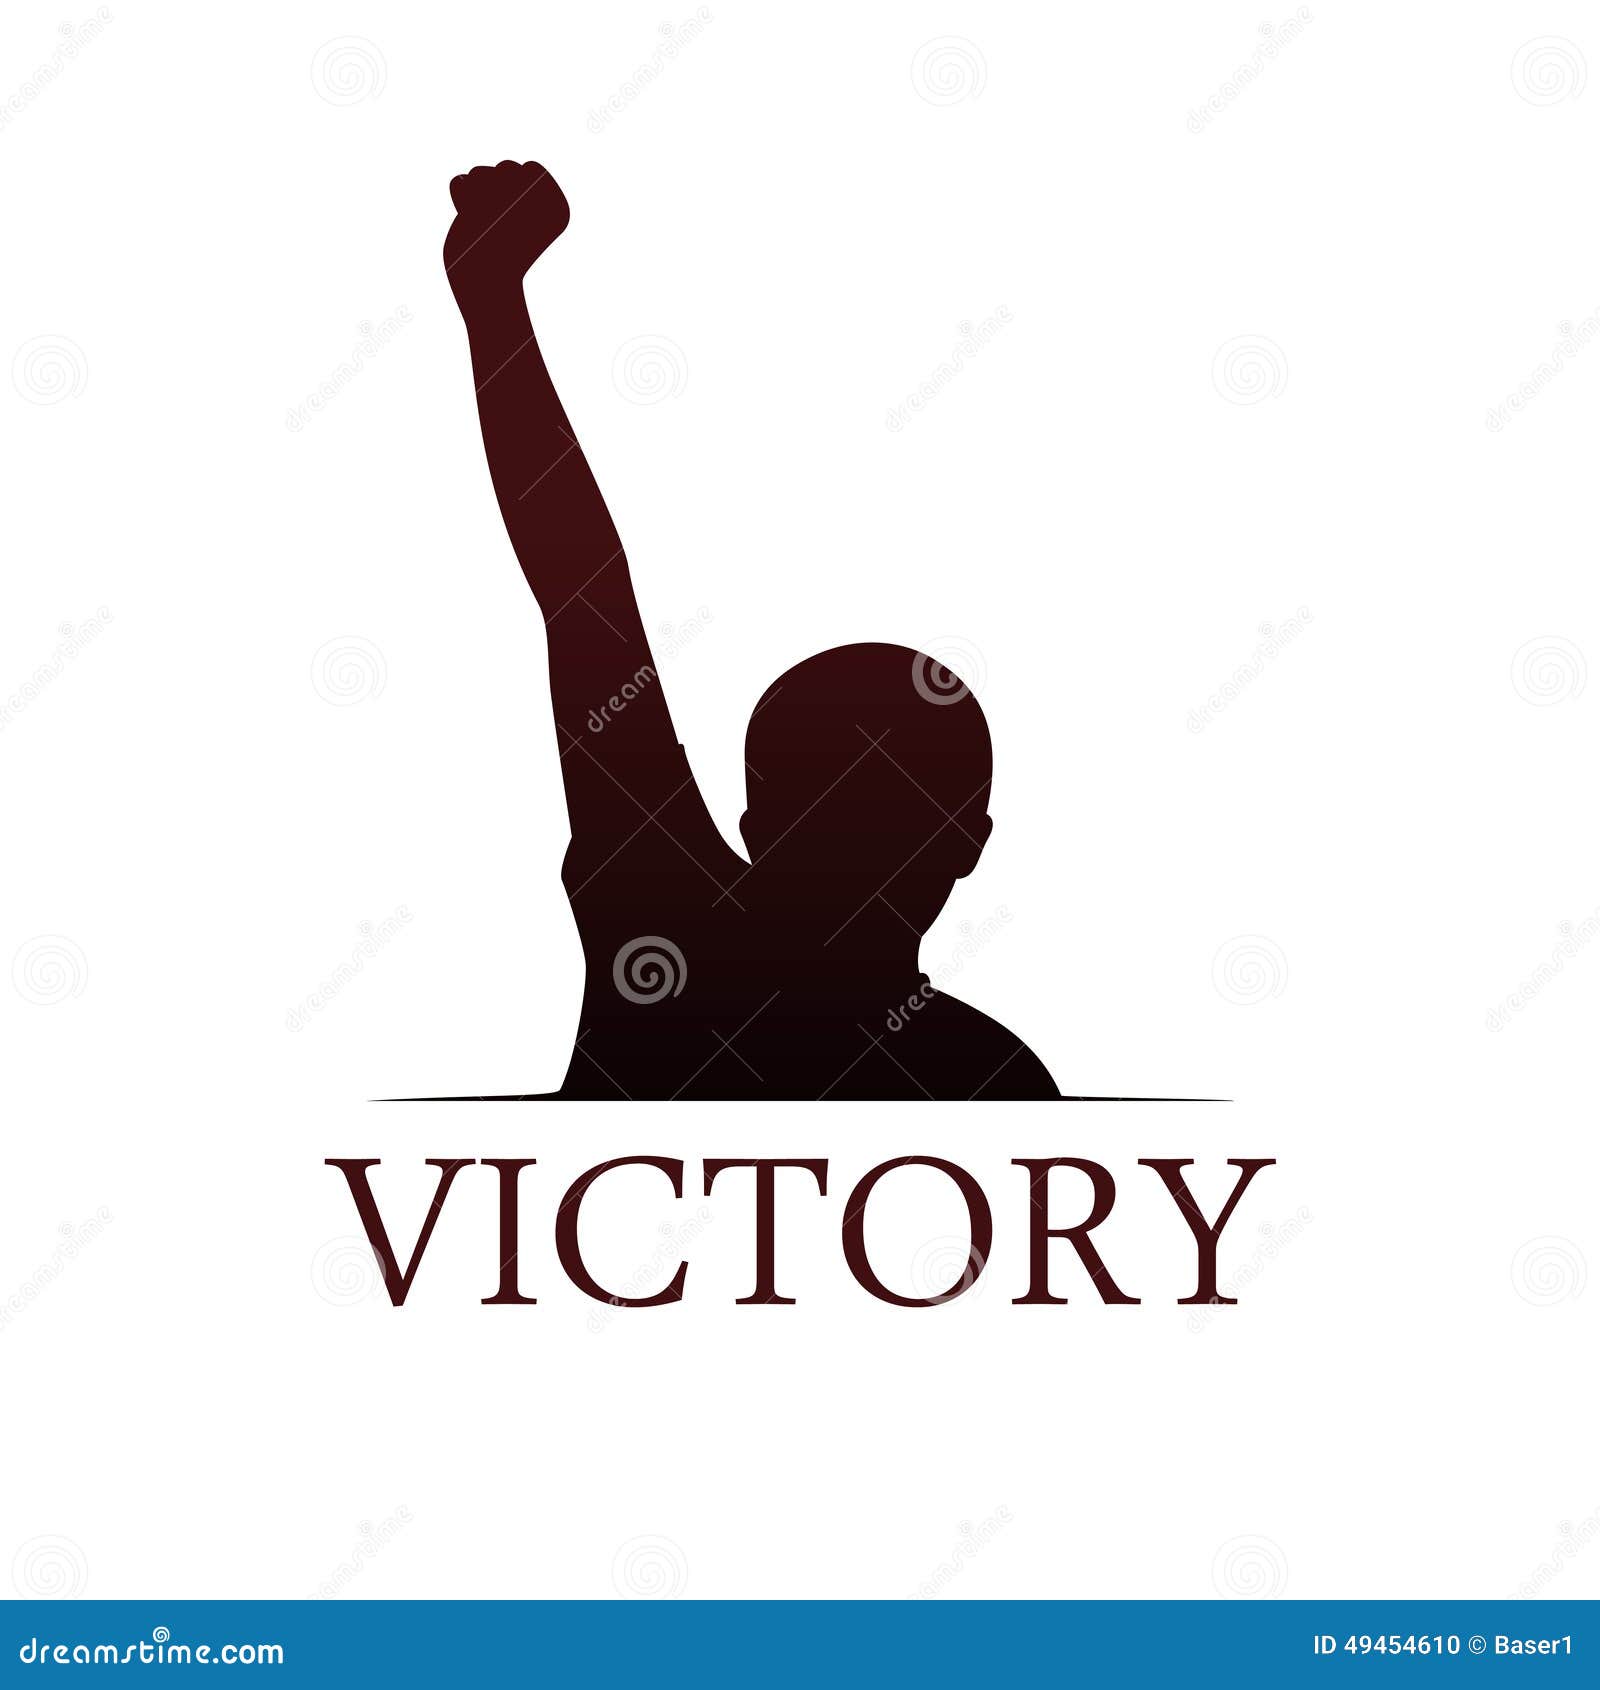 clipart of victory - photo #2